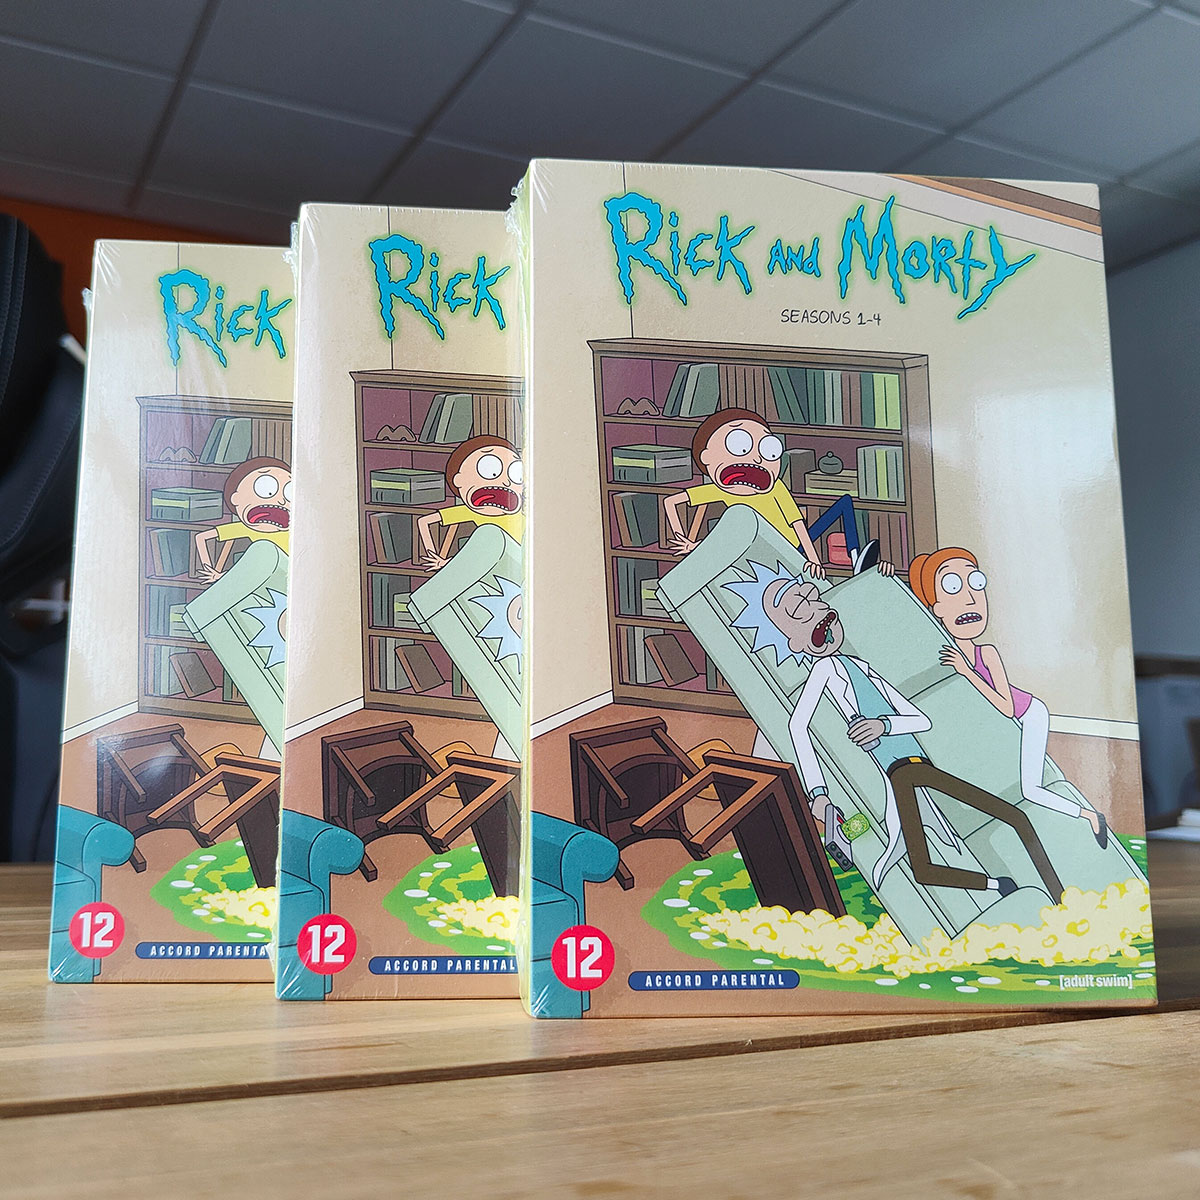 Rick and Morty op DVD